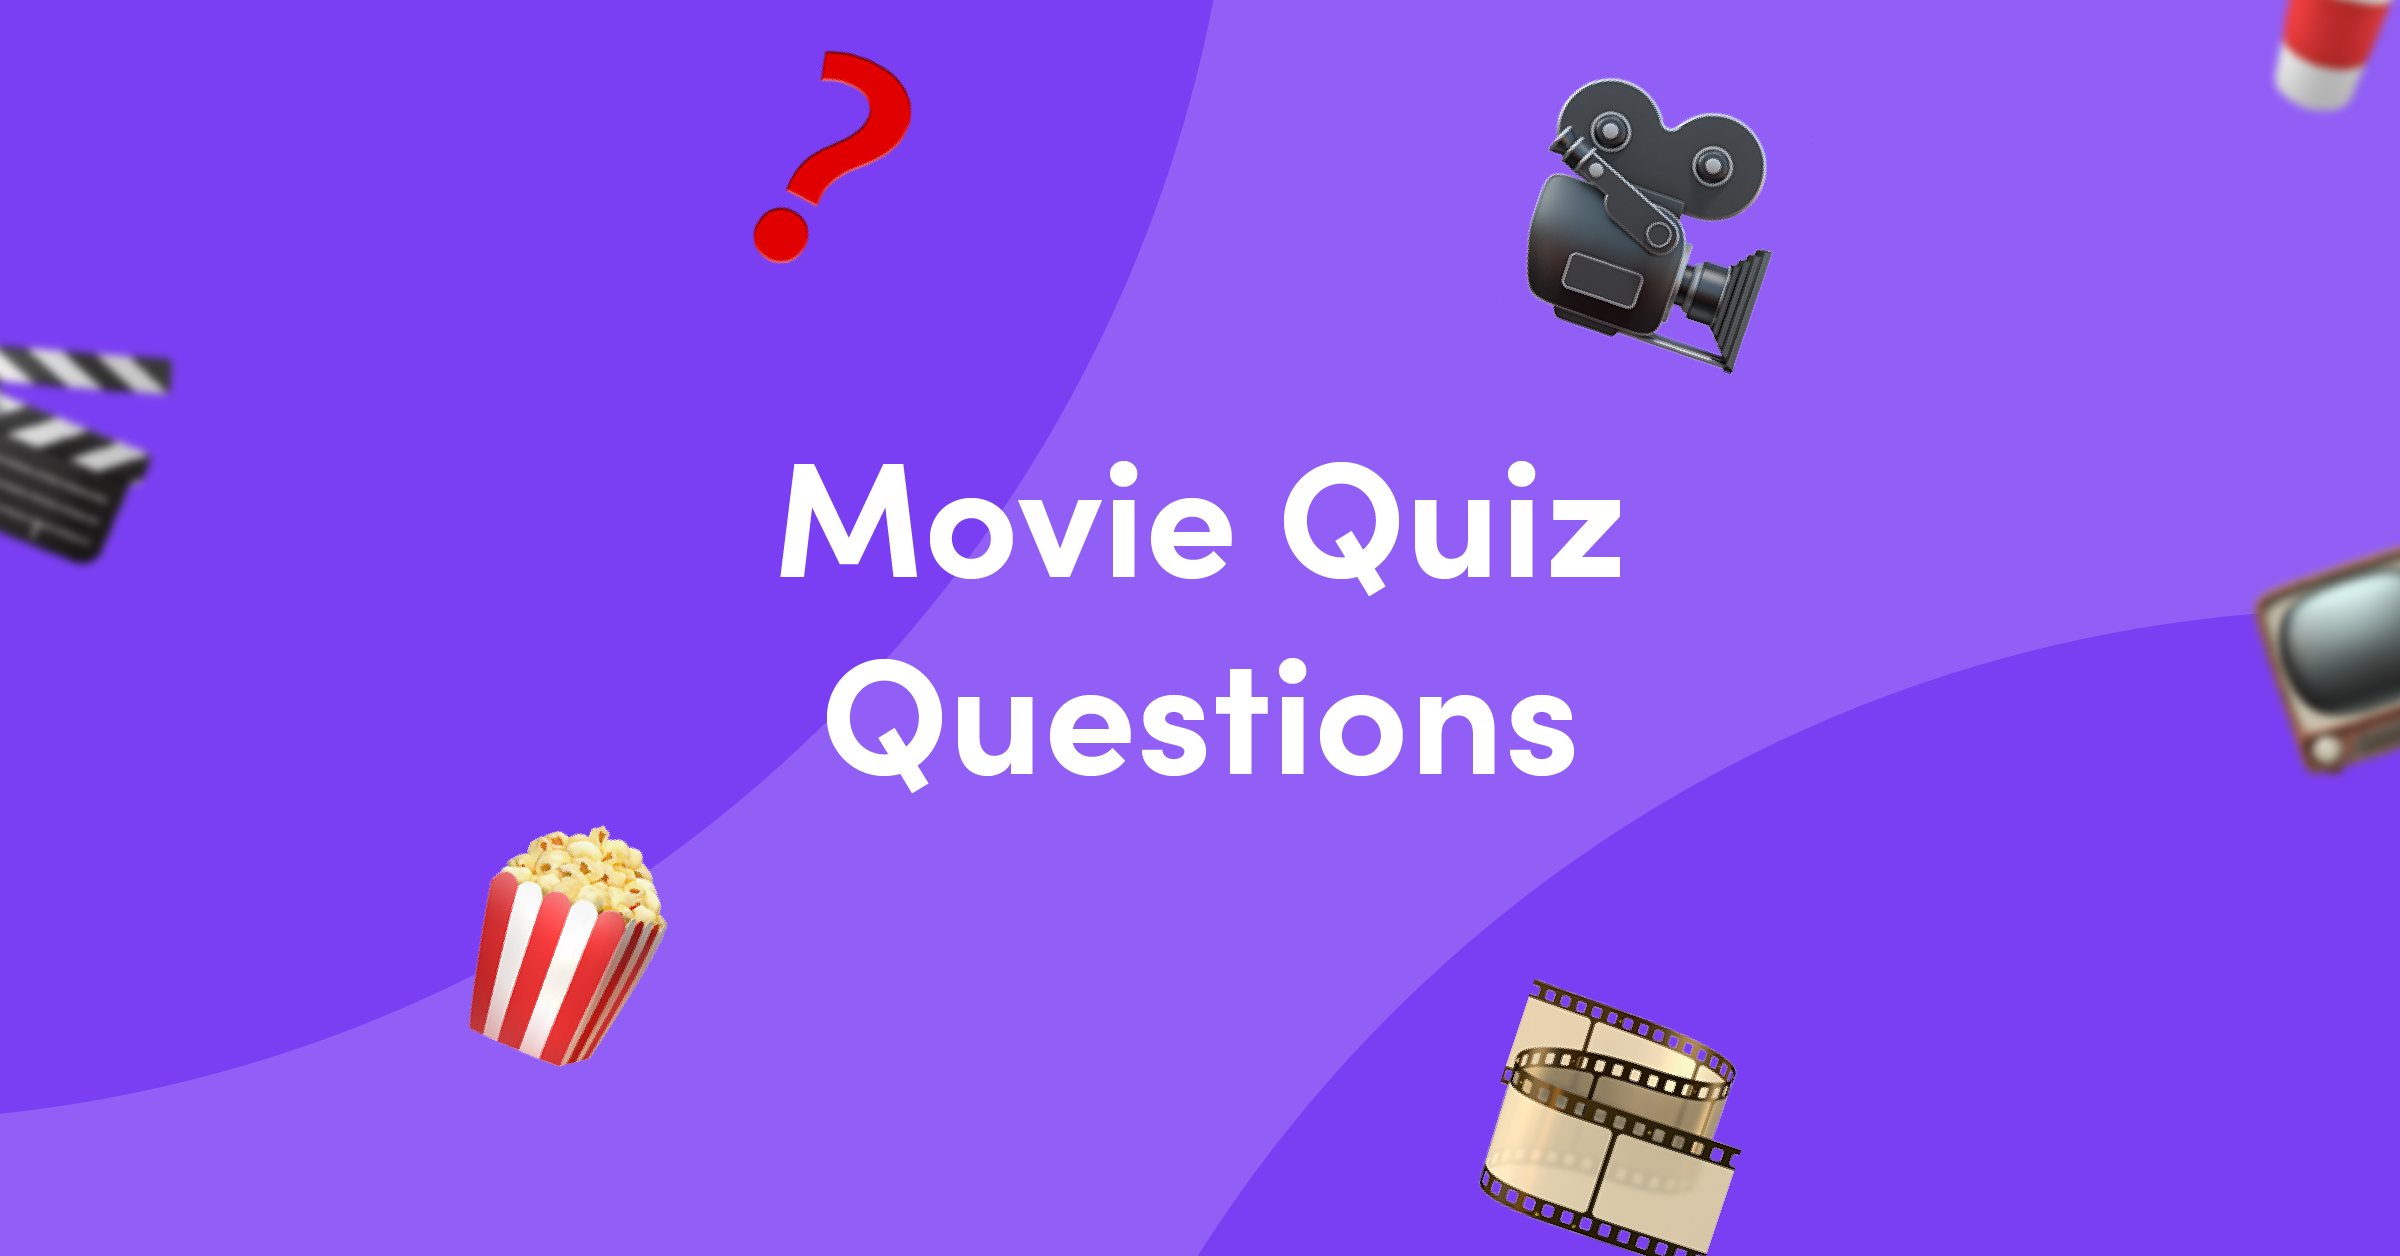 Emojis on purple background for movie quiz questions and answers